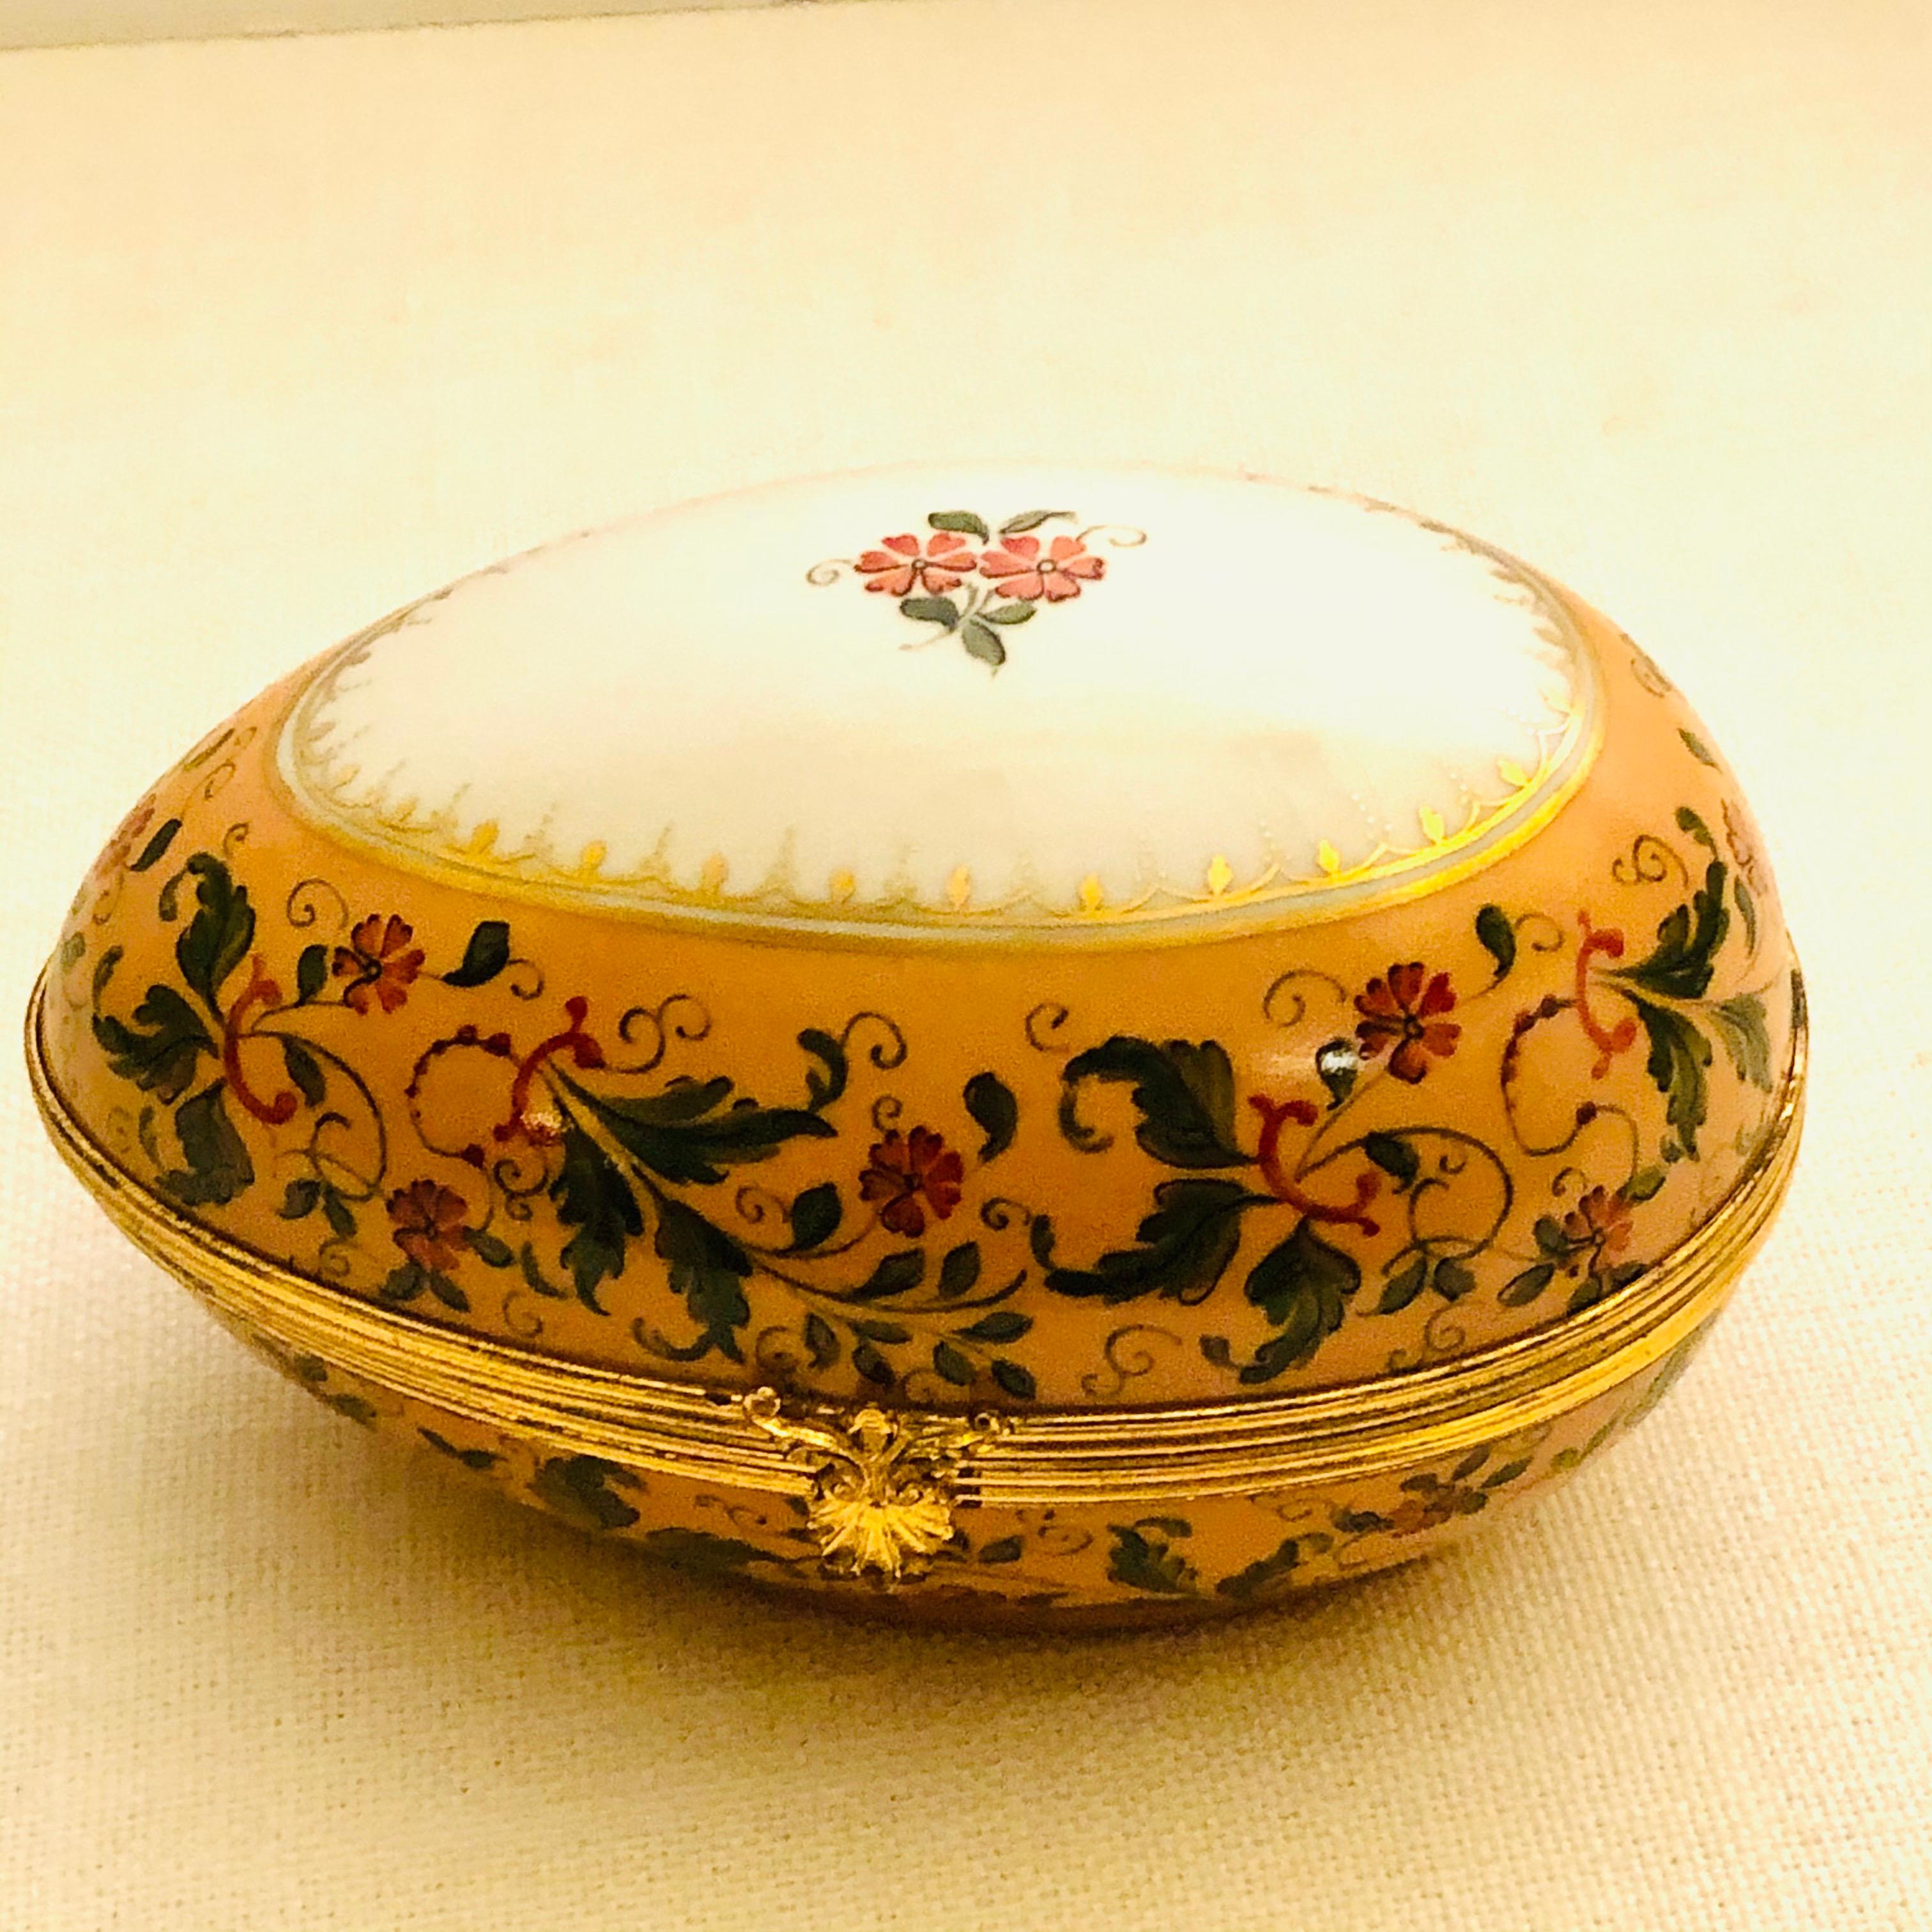 Romantic Le Tallec Peach Ground Egg Shaped Box Painted with Peach Flowers & Green Leaves